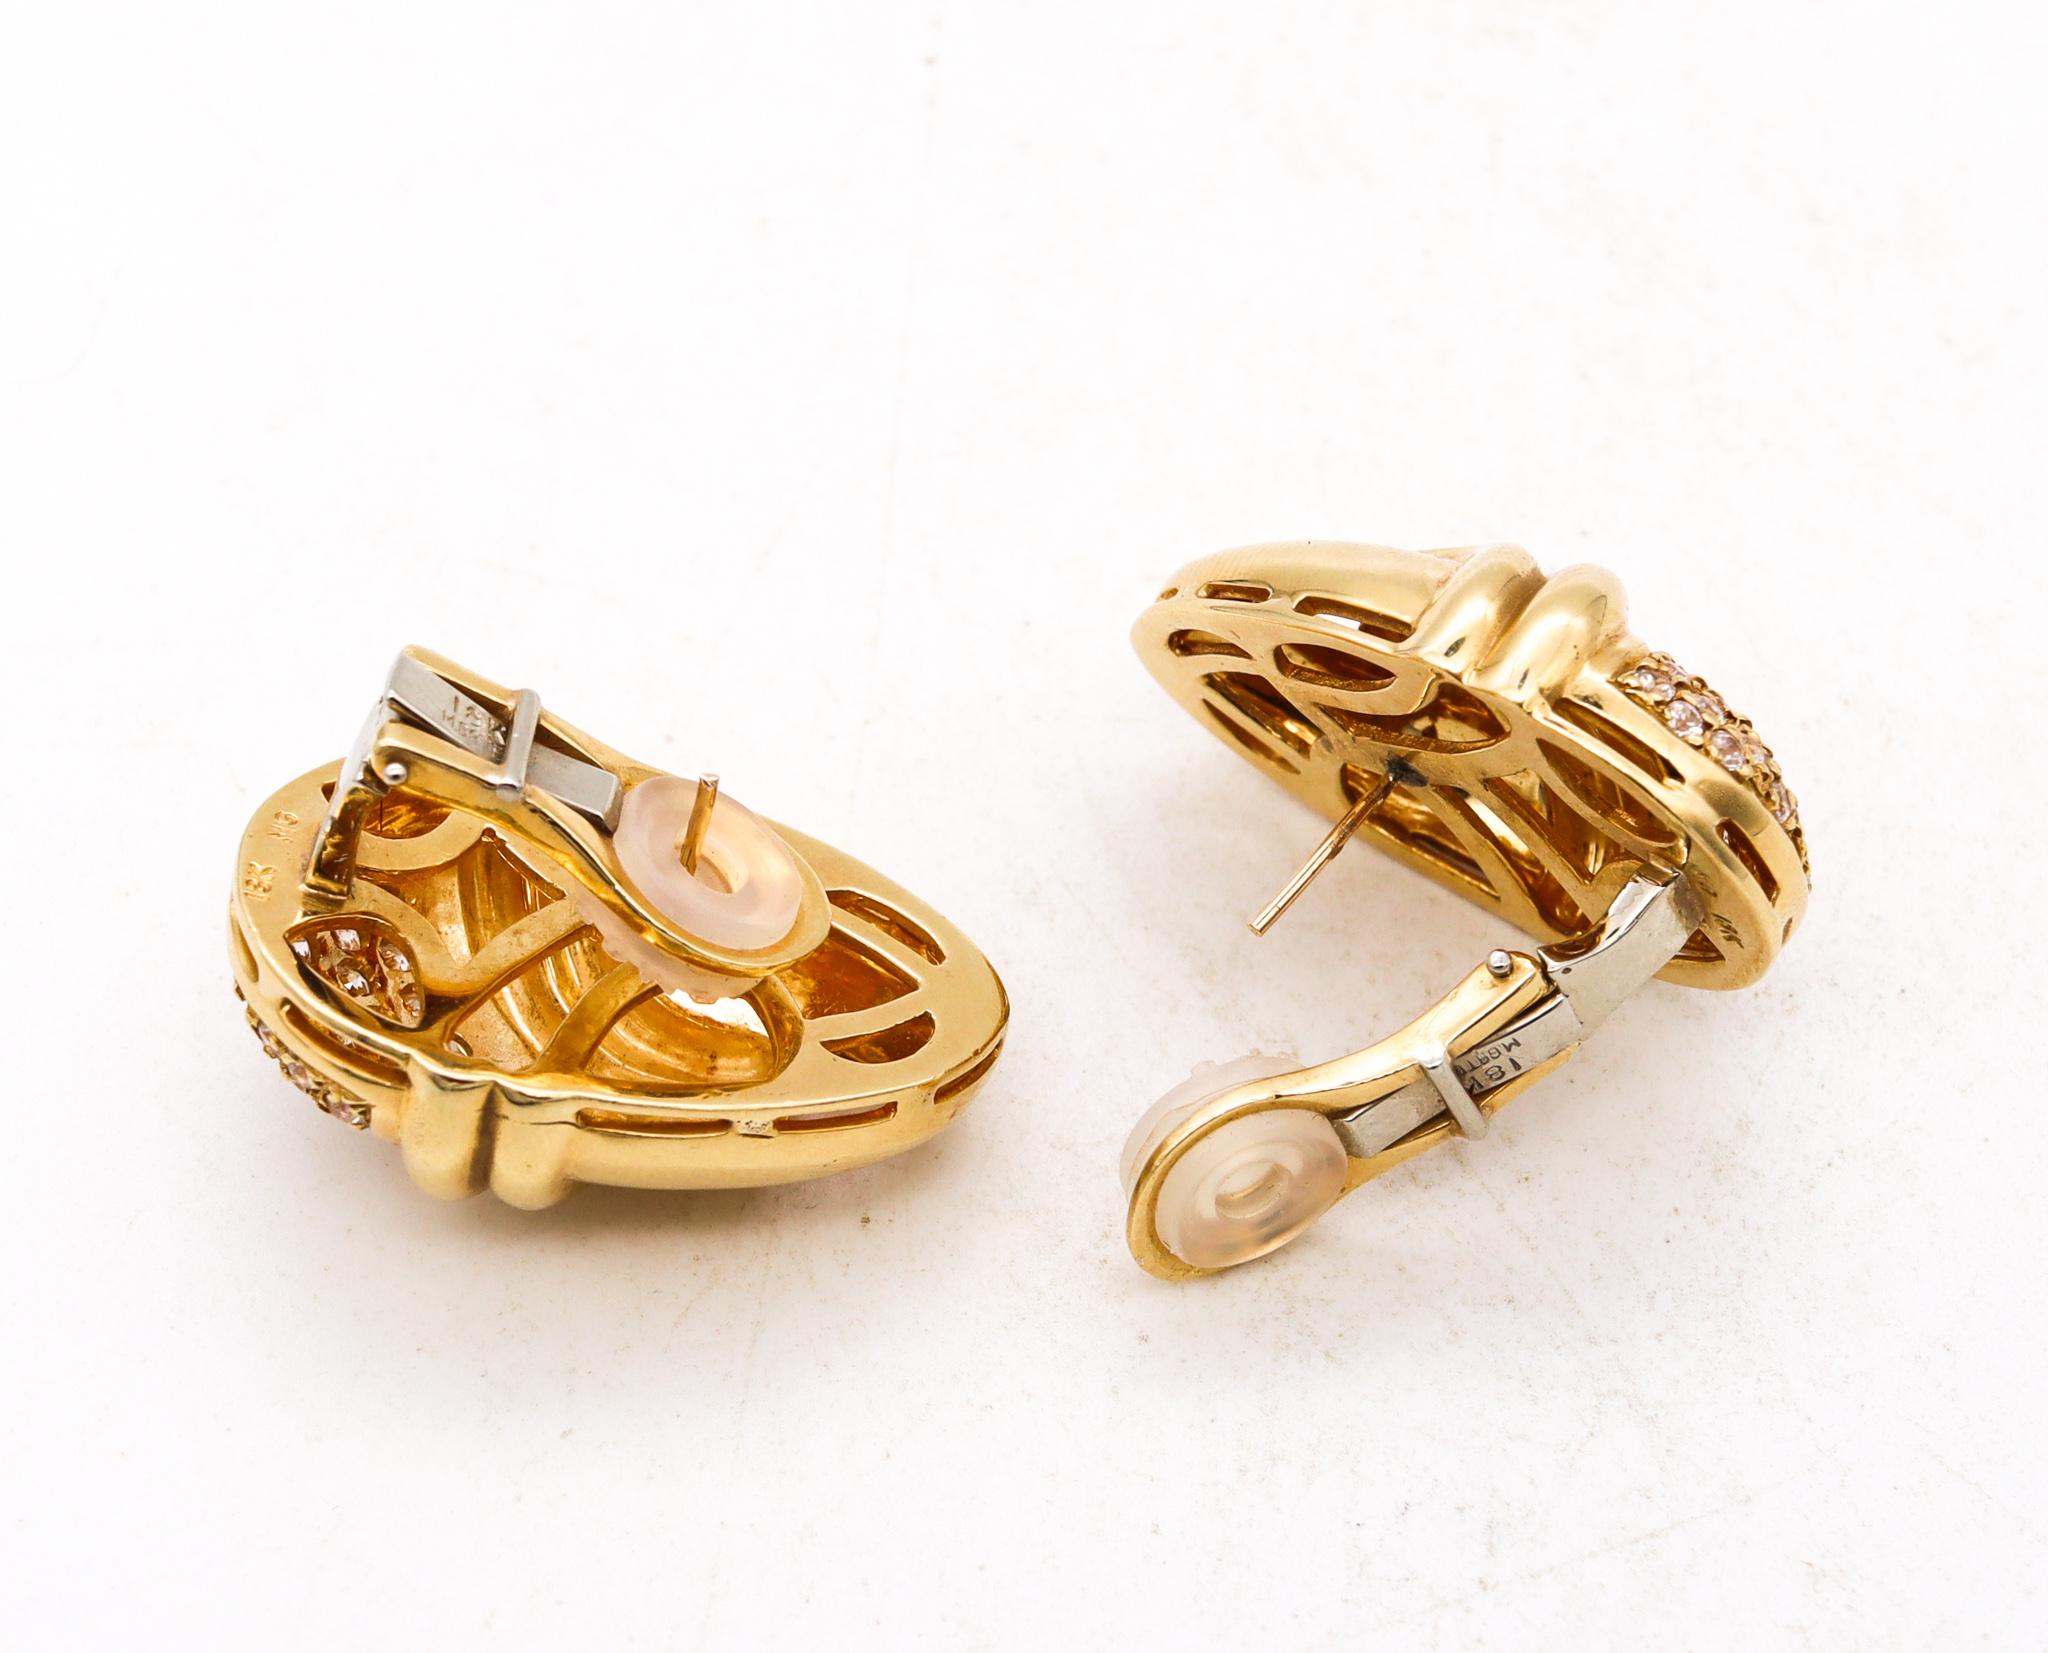 Michael Gates Drapery Clips Earrings Solid 18kt Yellow Gold 1.68 Cts in Diamonds In Excellent Condition For Sale In Miami, FL